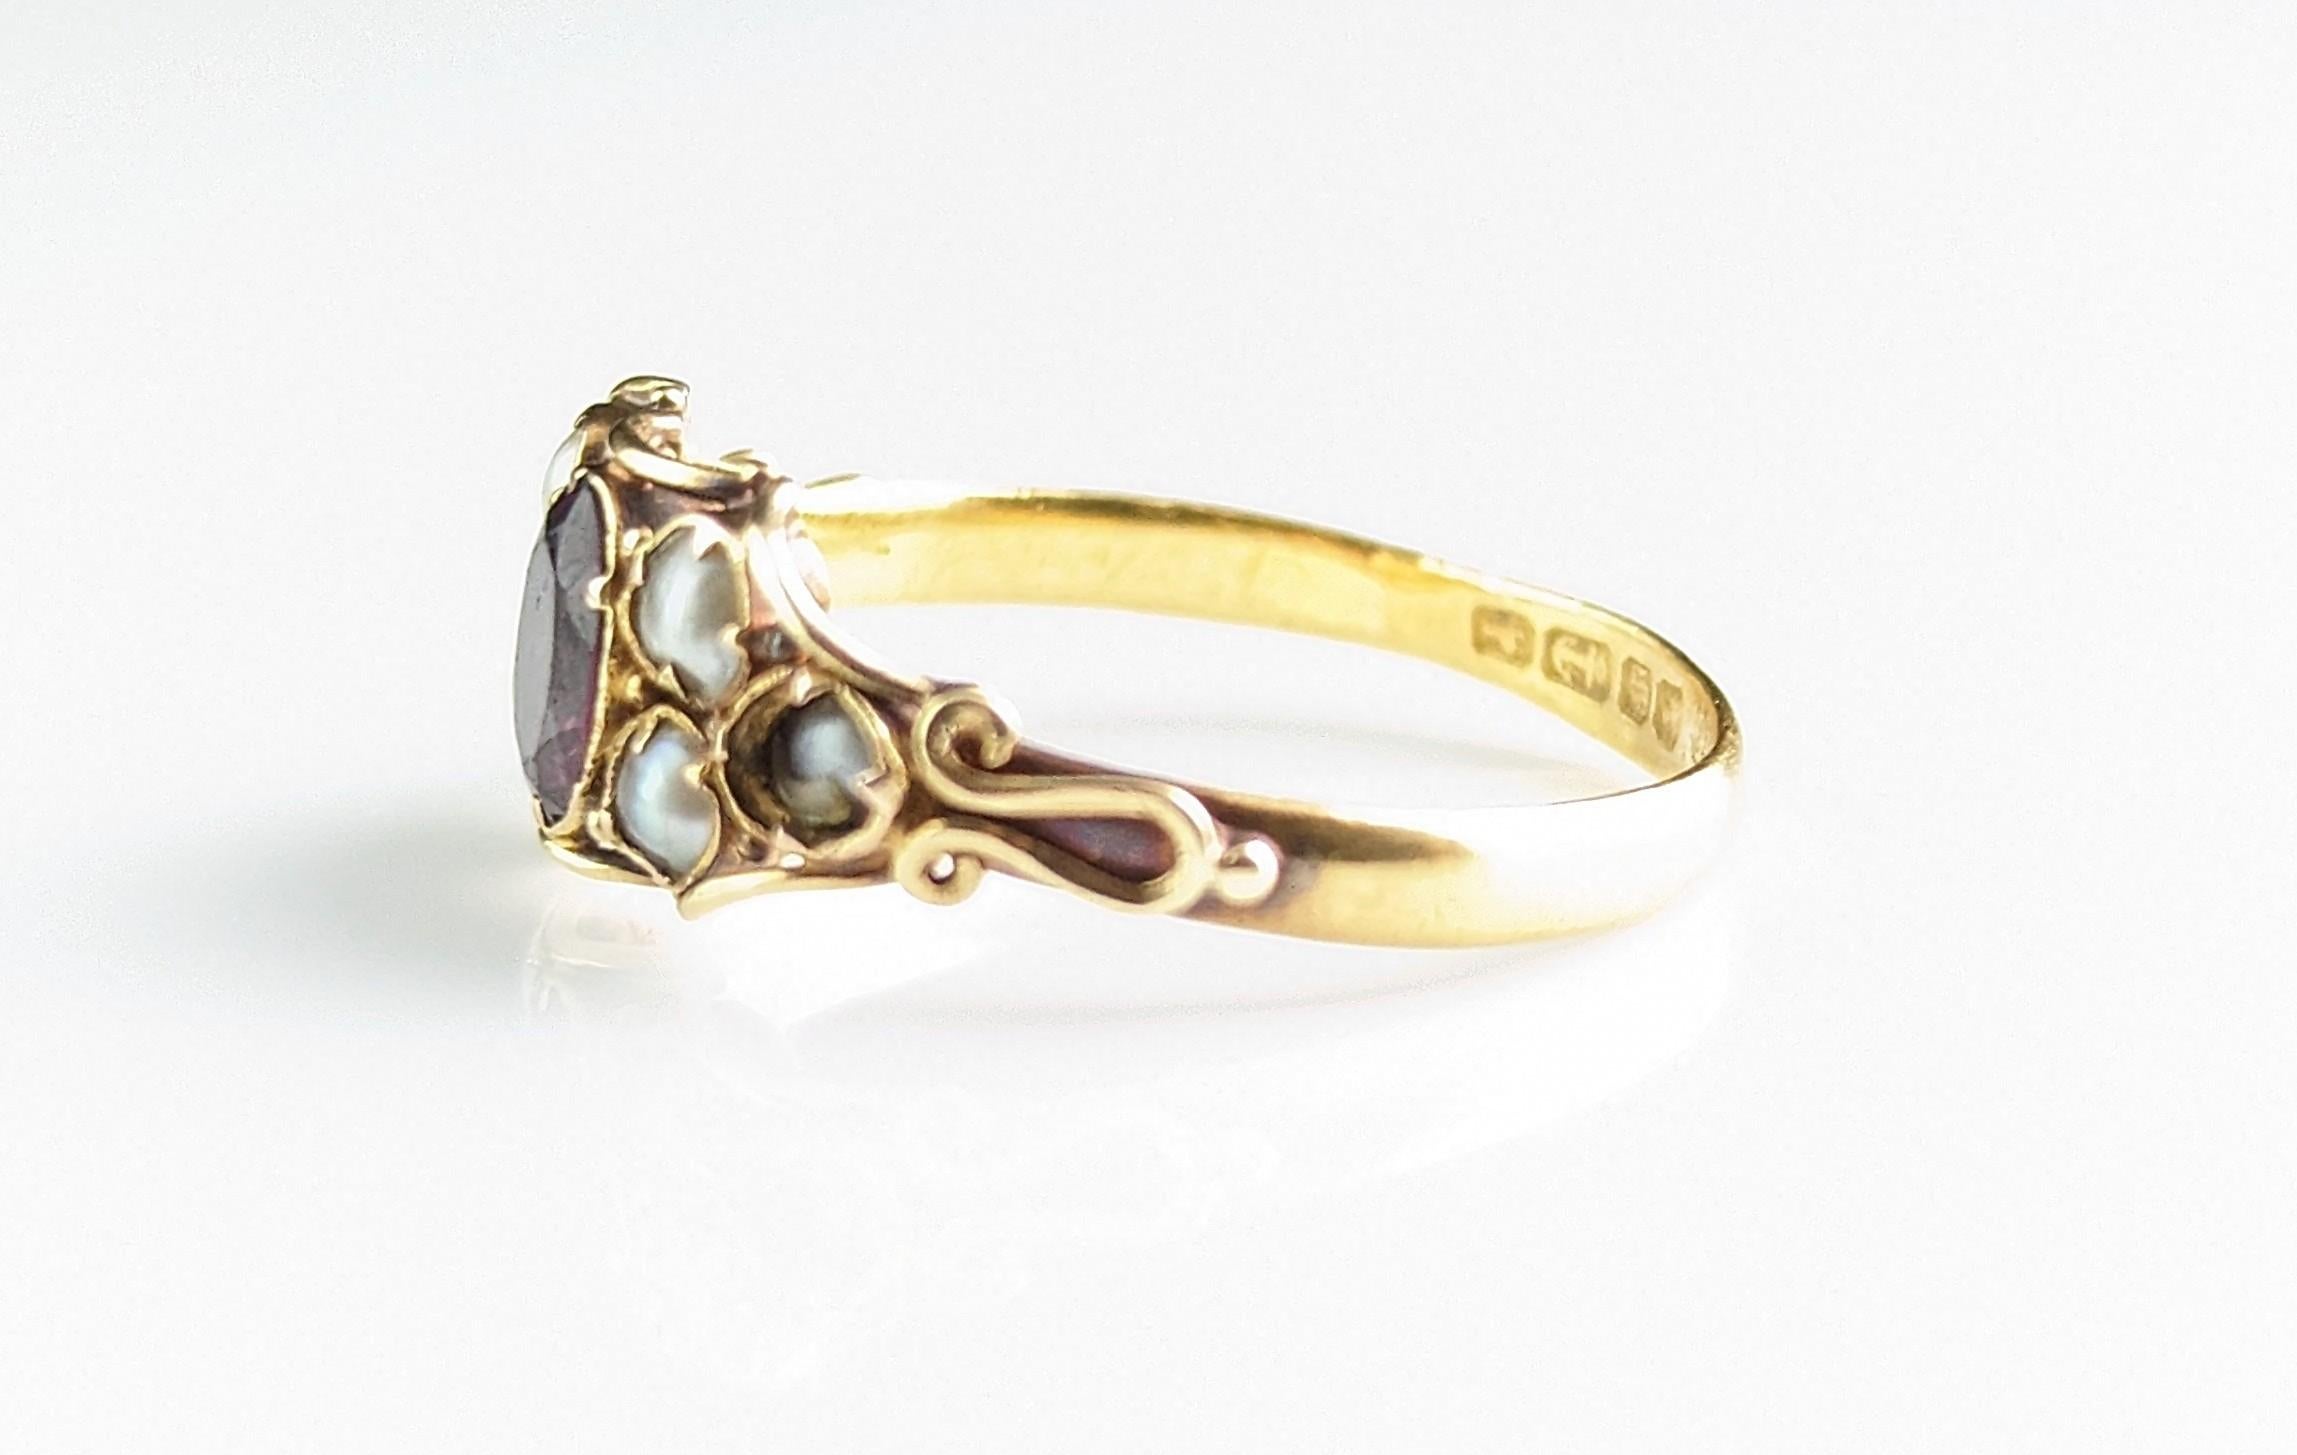 Antique Almandine Garnet and Pearl Ring, 22k Yellow Gold 5